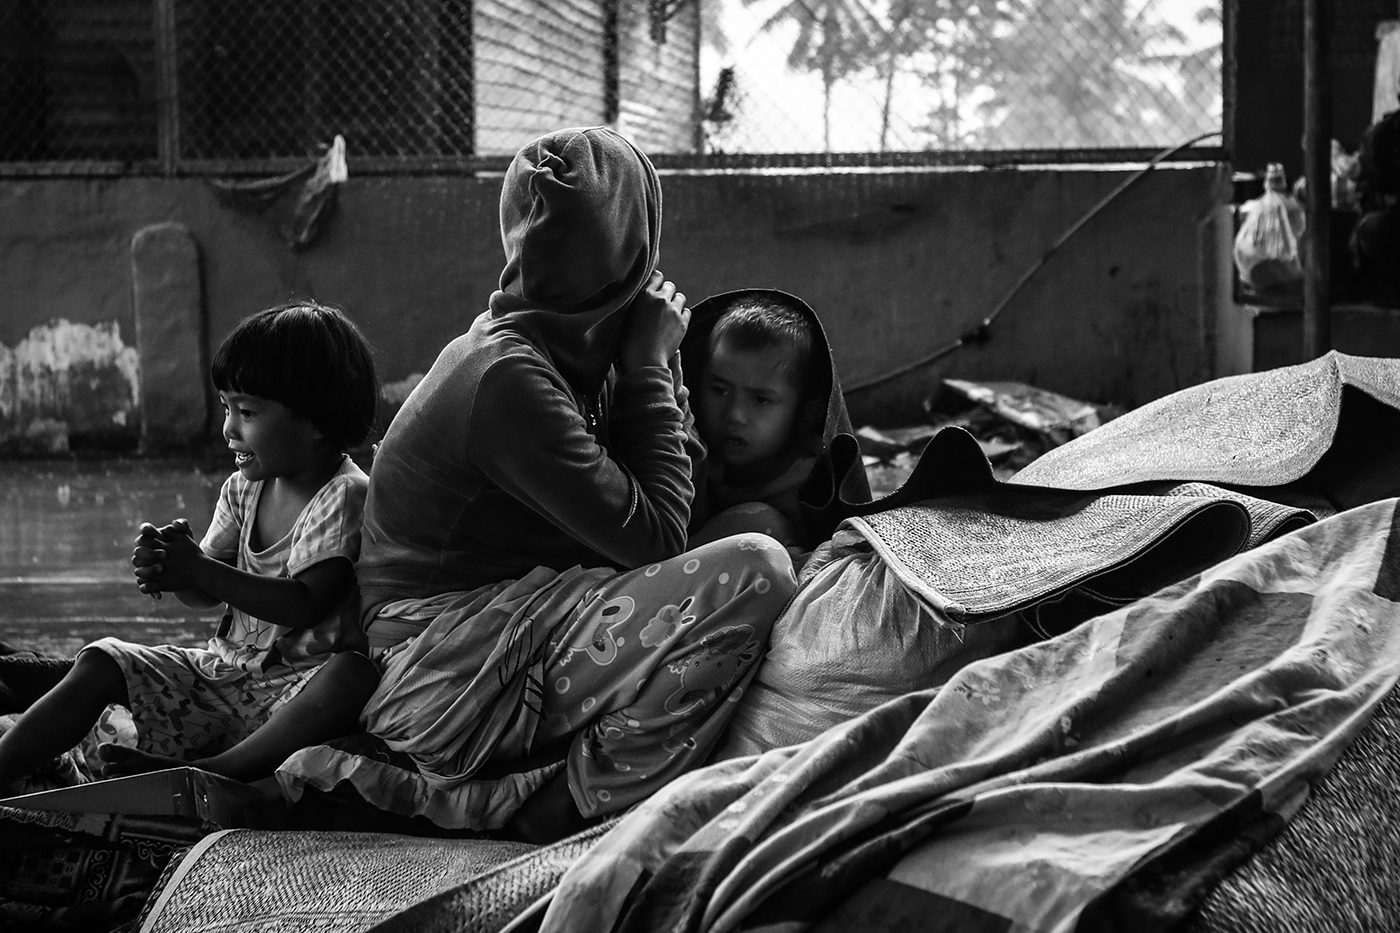 Lack of proper shelter in the early days of displacement has caused difficulties for the displaced families at the Saguiaran evacuation center.